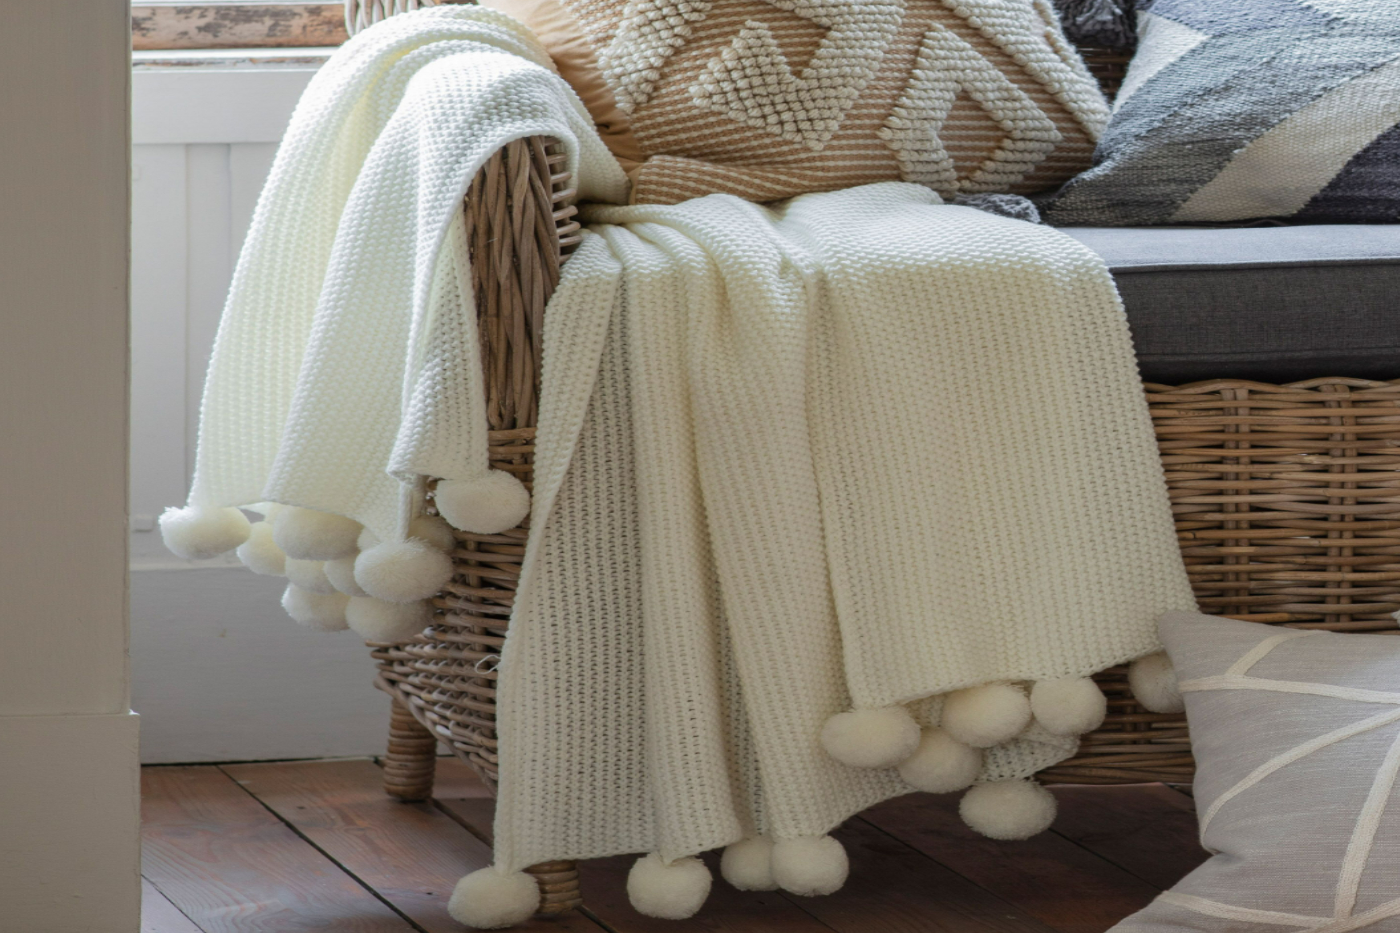 View Cream Moss Stitched Knitted Throw With Pom Pom Design 1700 x 1300mm Waffle Knitted Fabric Can Be Used On Bed Or Chair Modern Design information